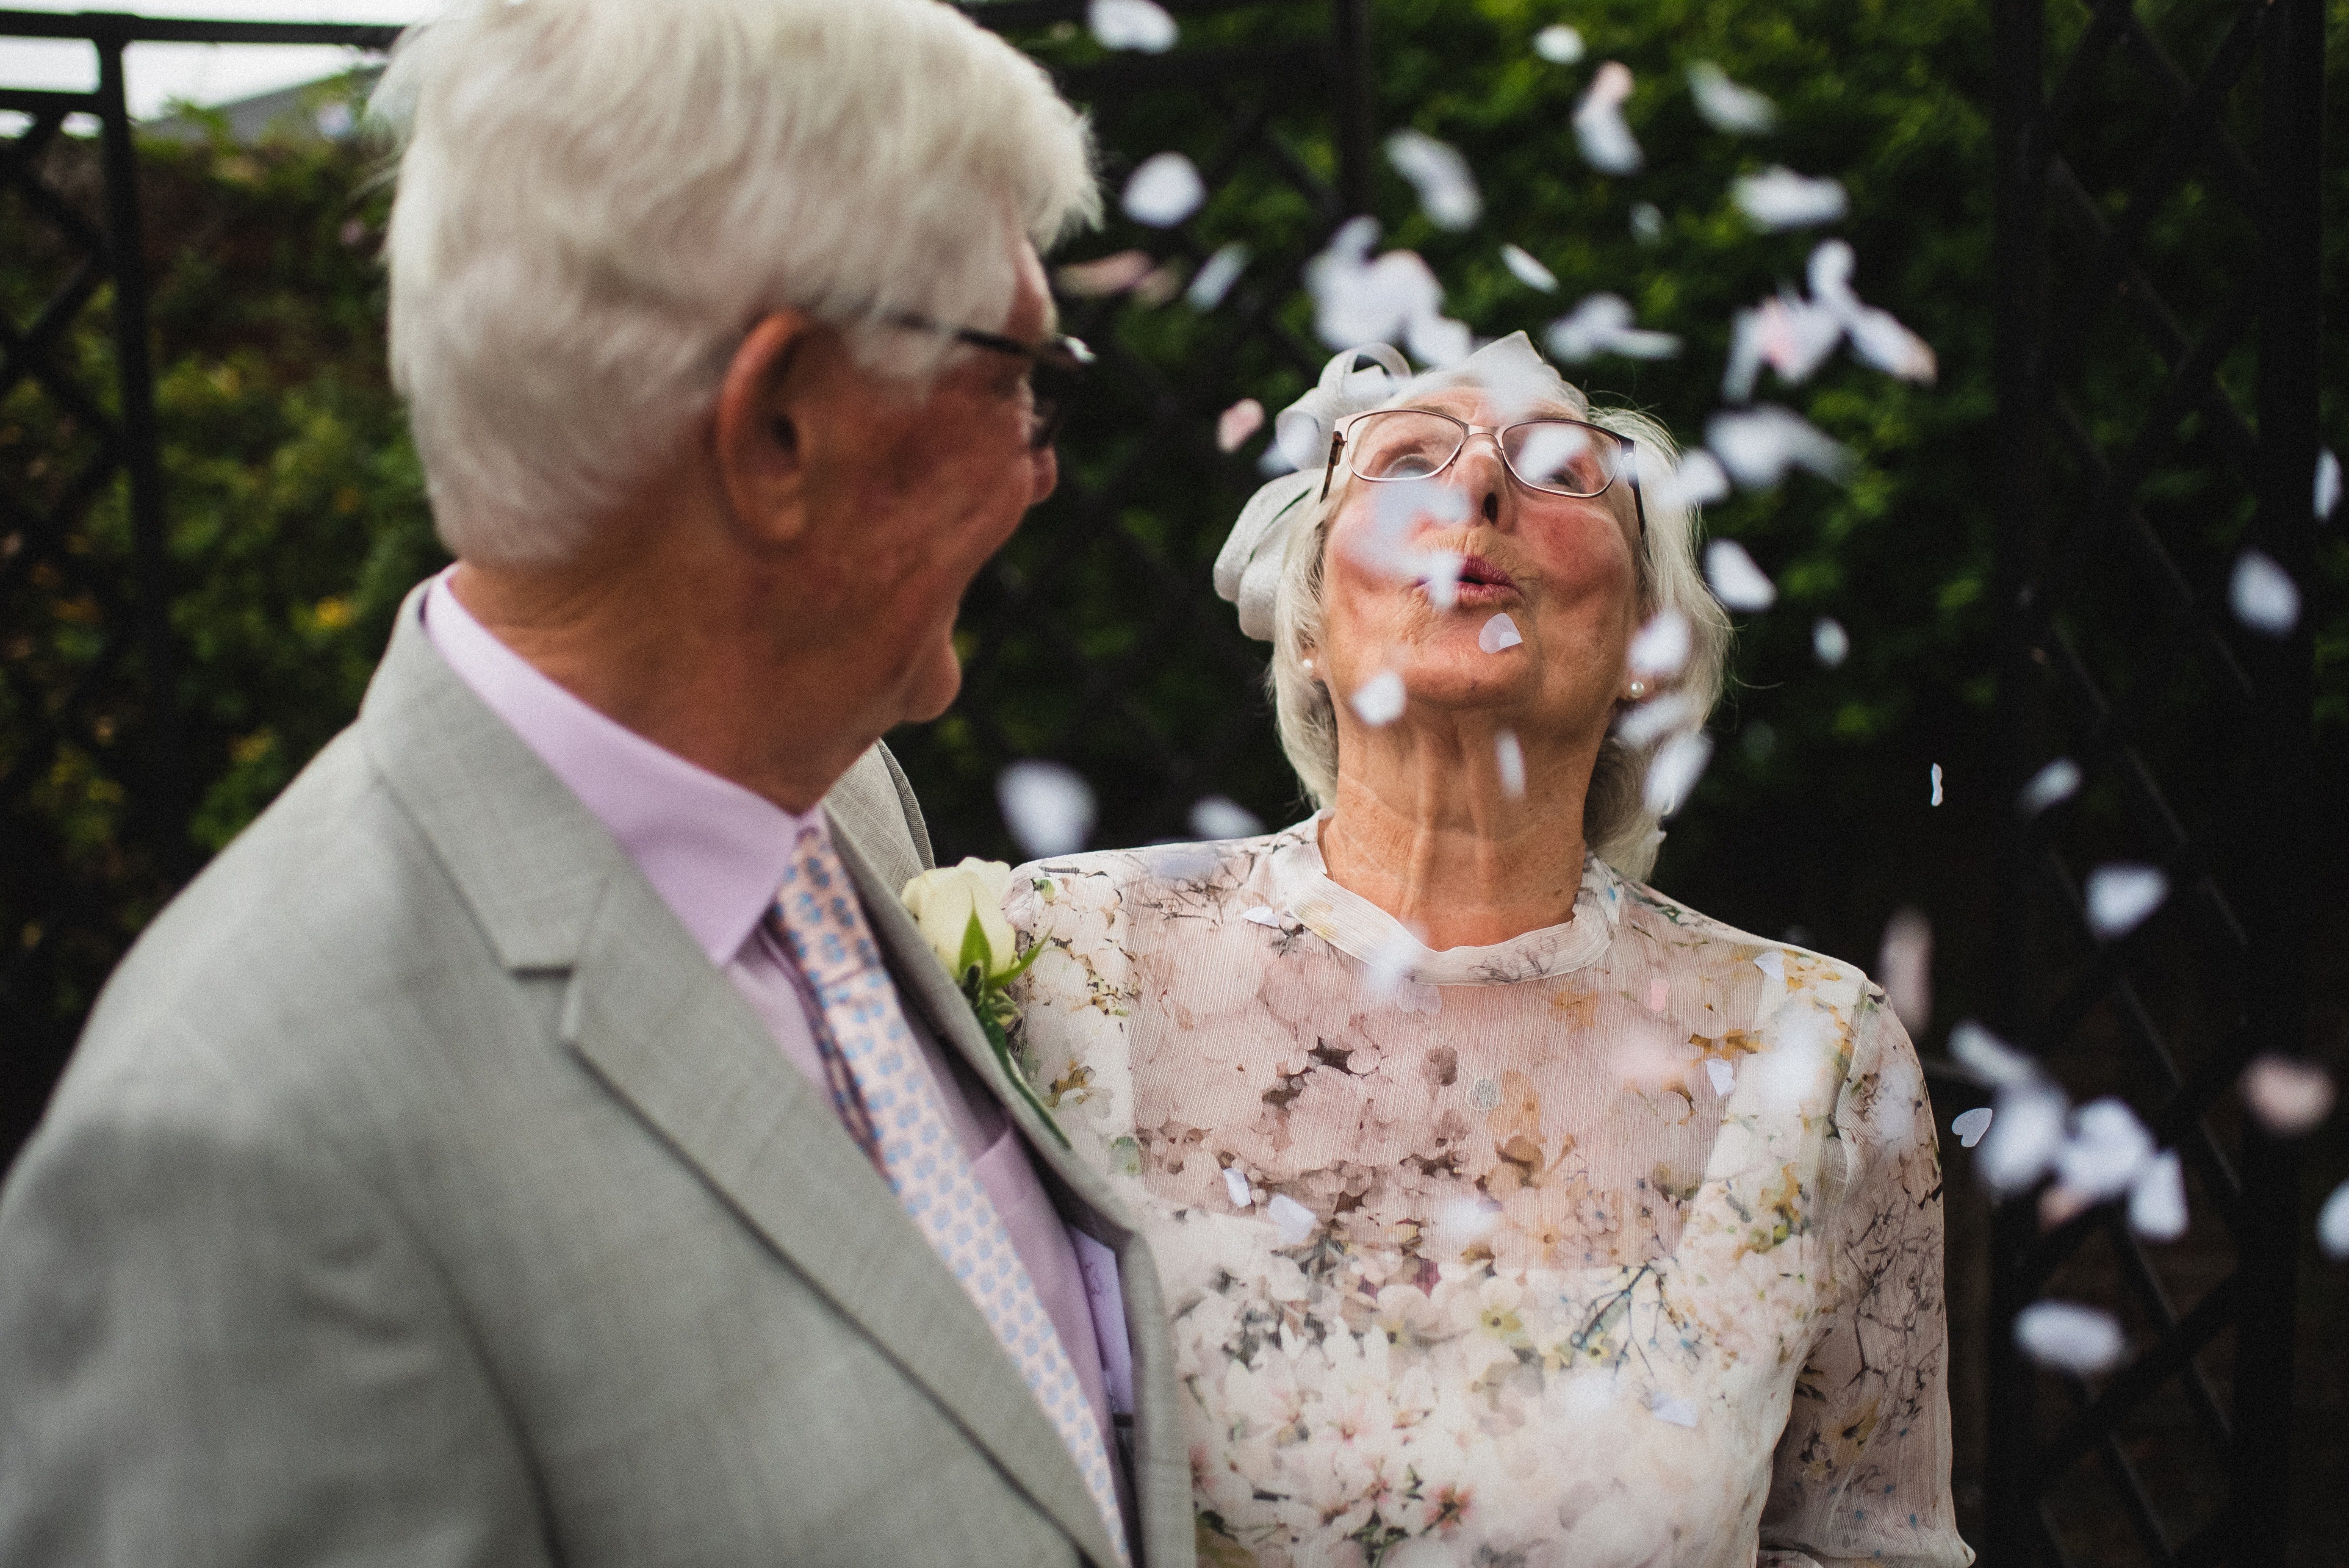 Donald and Betty renewed their vows. | Source: Unsplash